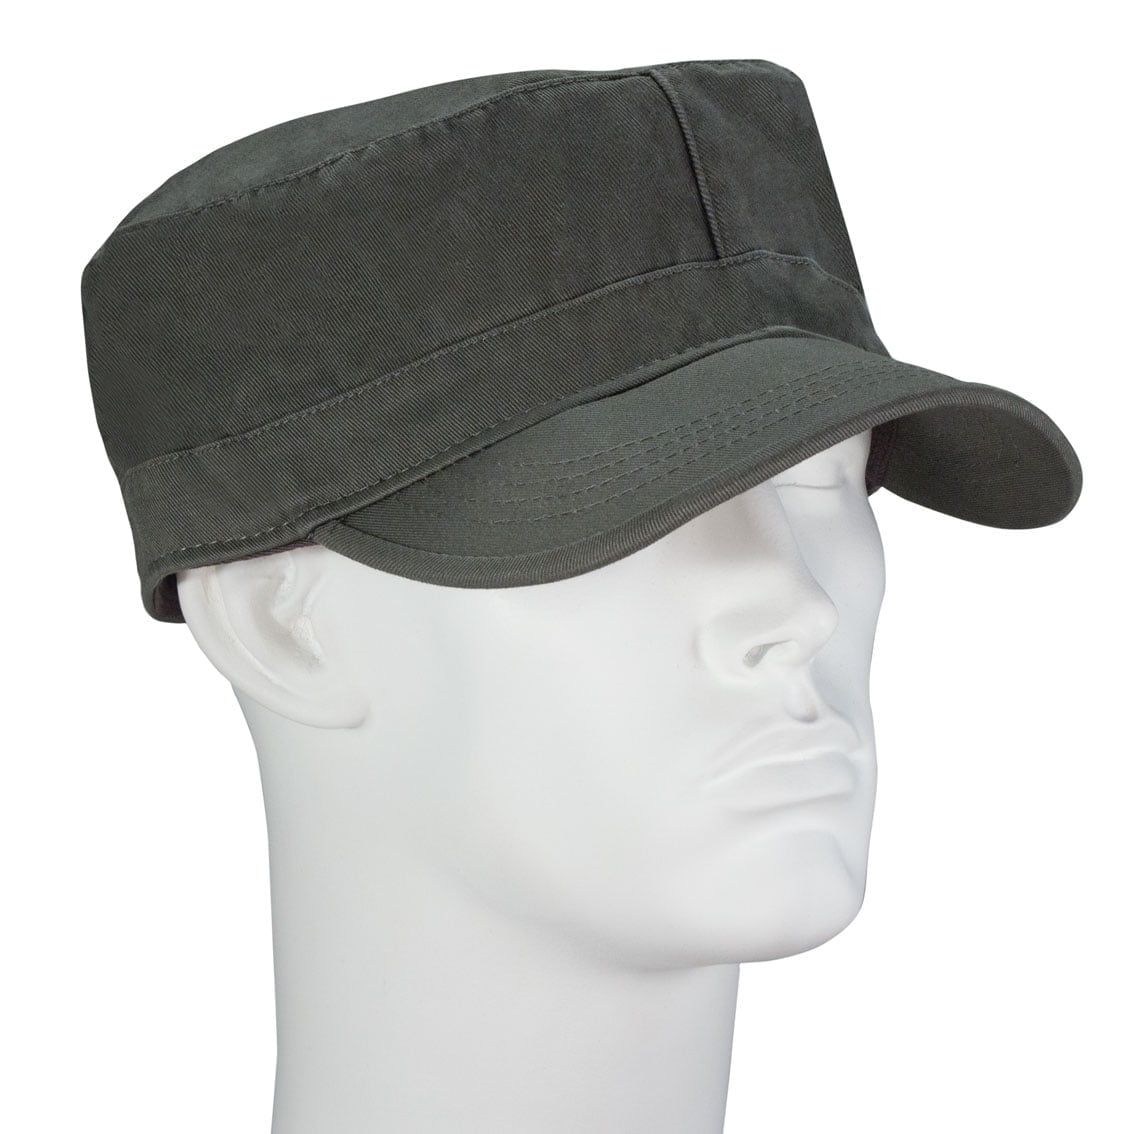 12pcs Olive Solid Castro Military Fatigue Army Hats - Fitted - Unconstructed - 100% Cotton - Bulk by the Dozen - Wholesale